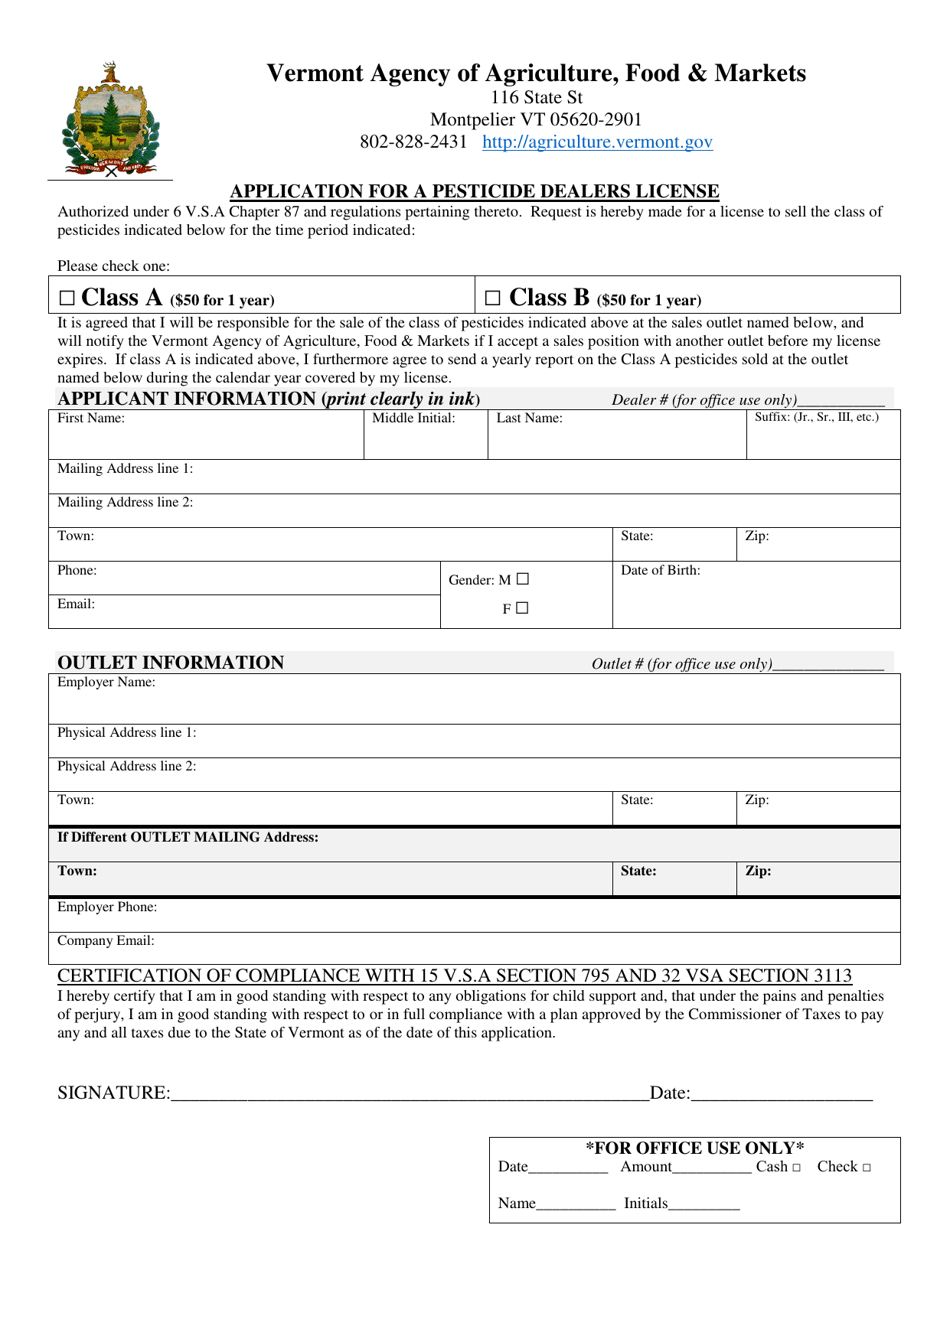 Application for a Pesticide Dealers License - Vermont, Page 1